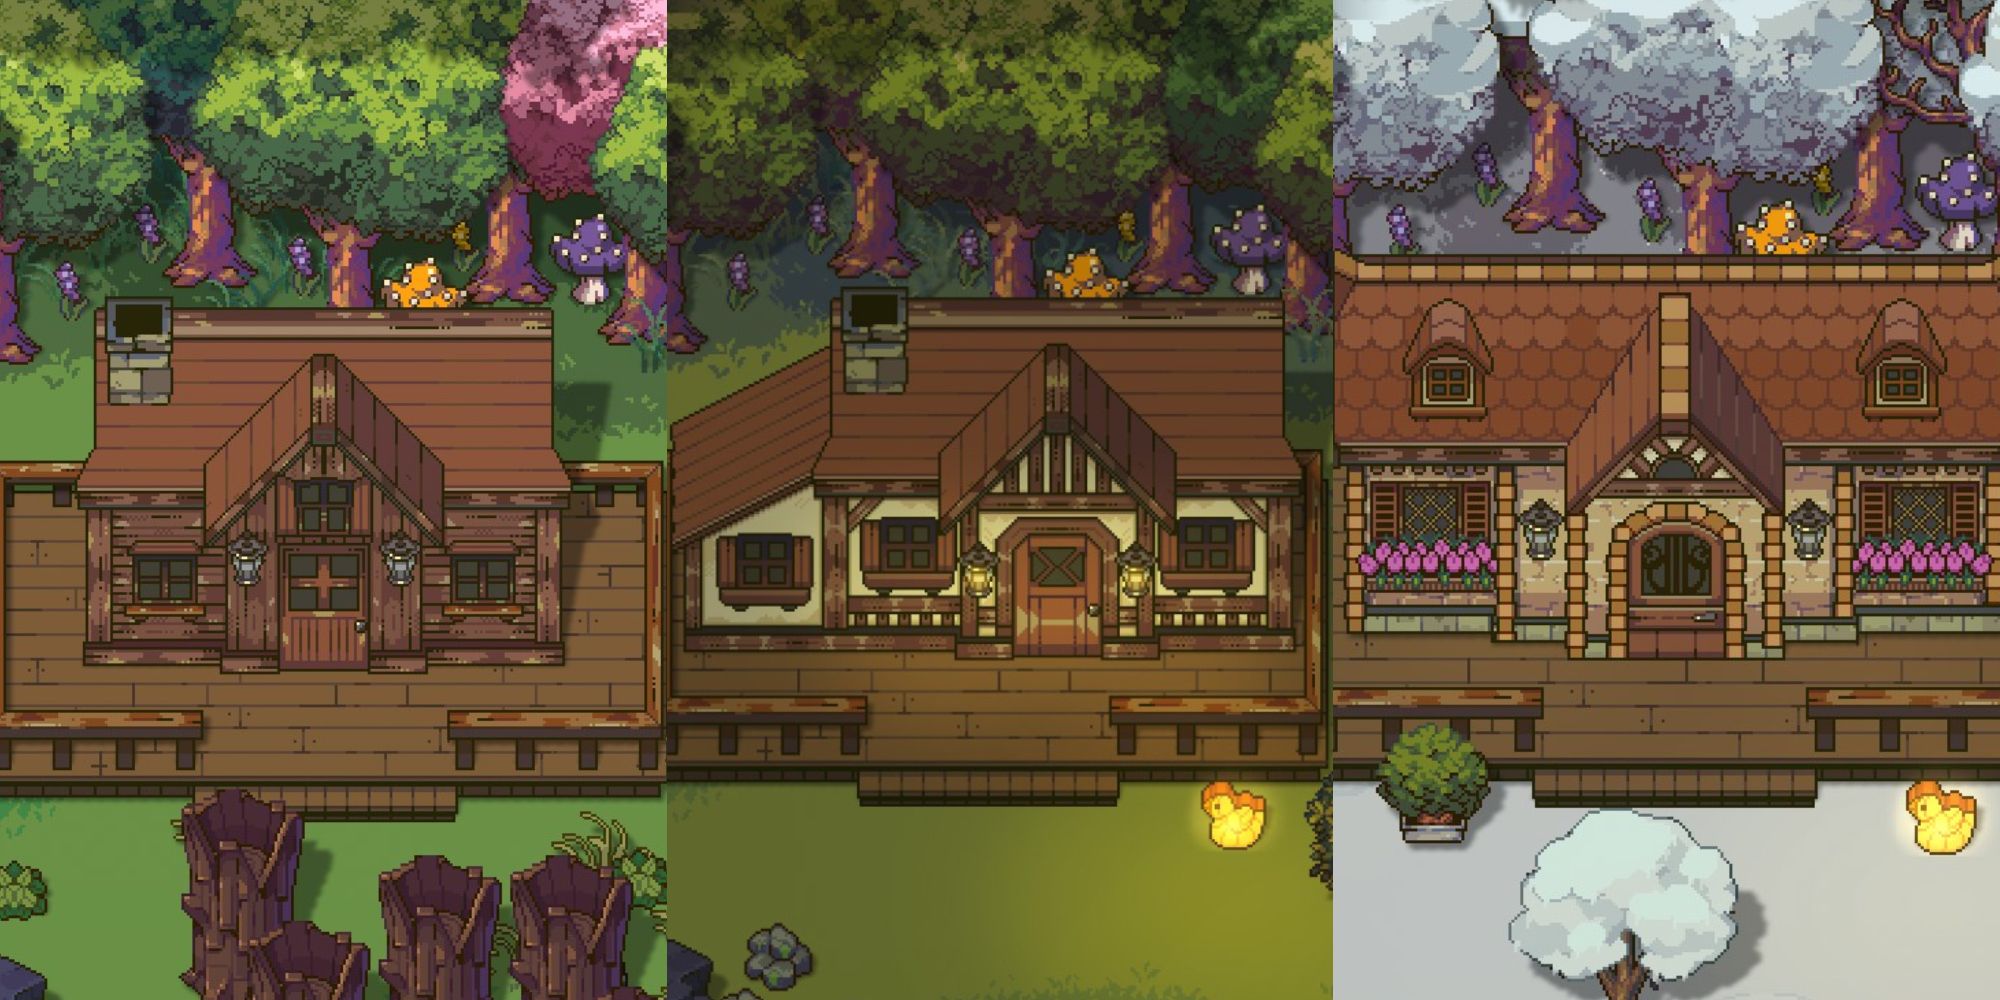 sun haven tier 1 house, tier 2 house, and tier 3 house